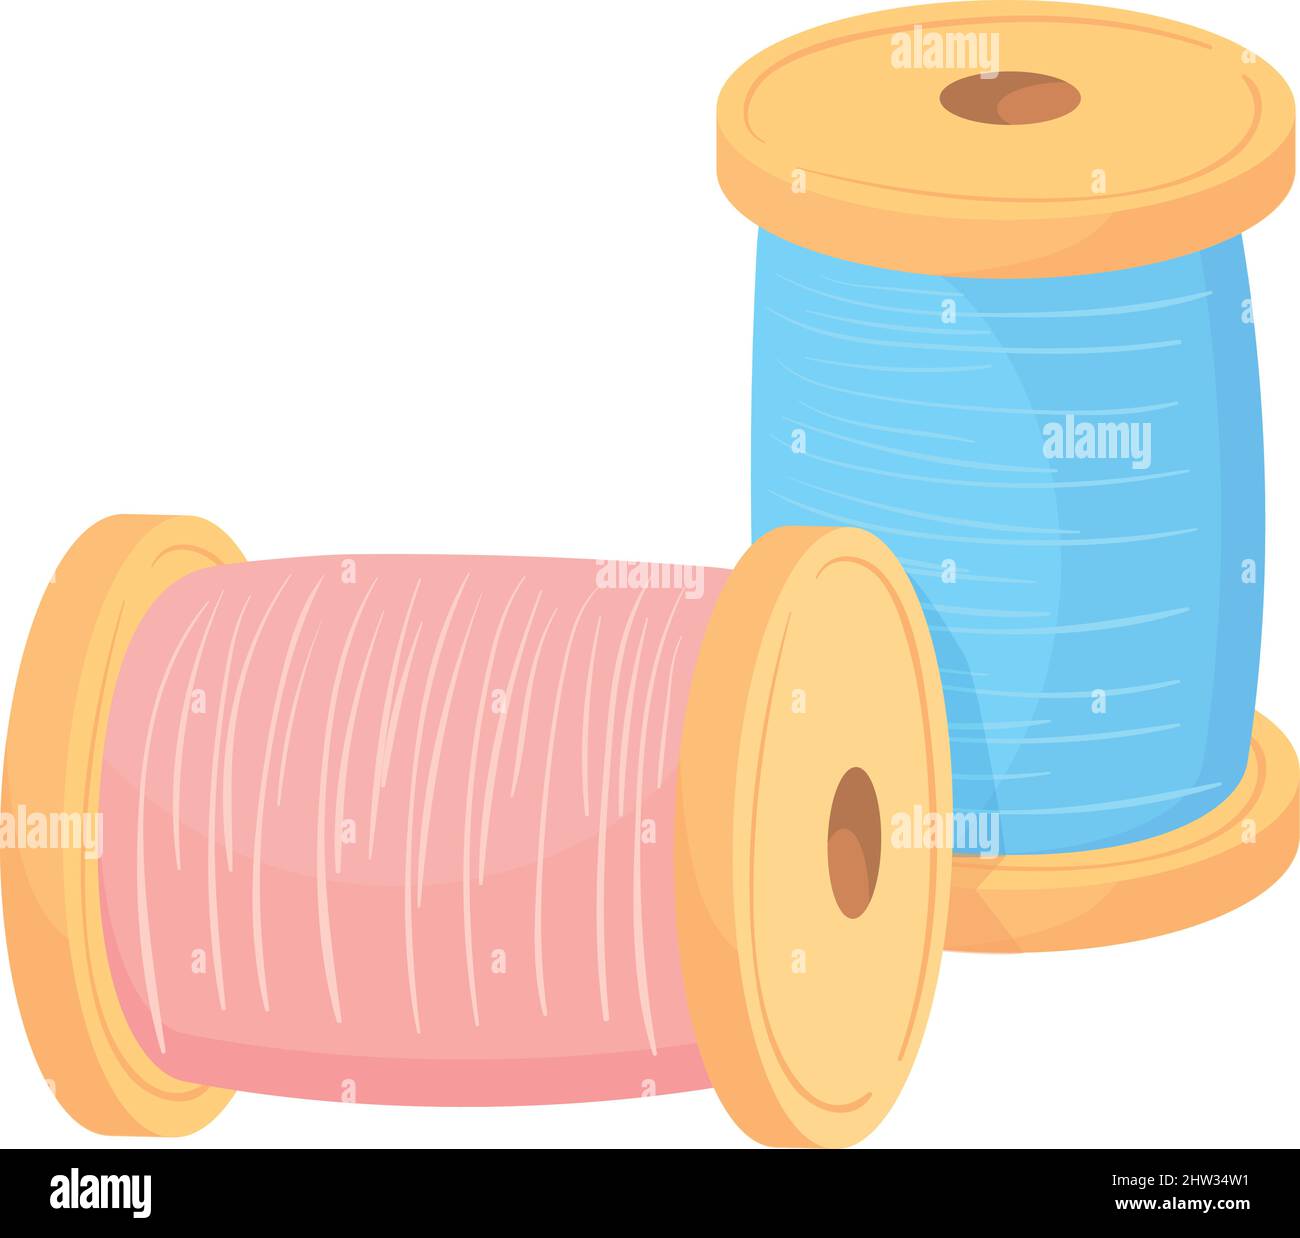 Sewing thread spools icon. Cartoon wooden rolls isolated on white background Stock Vector